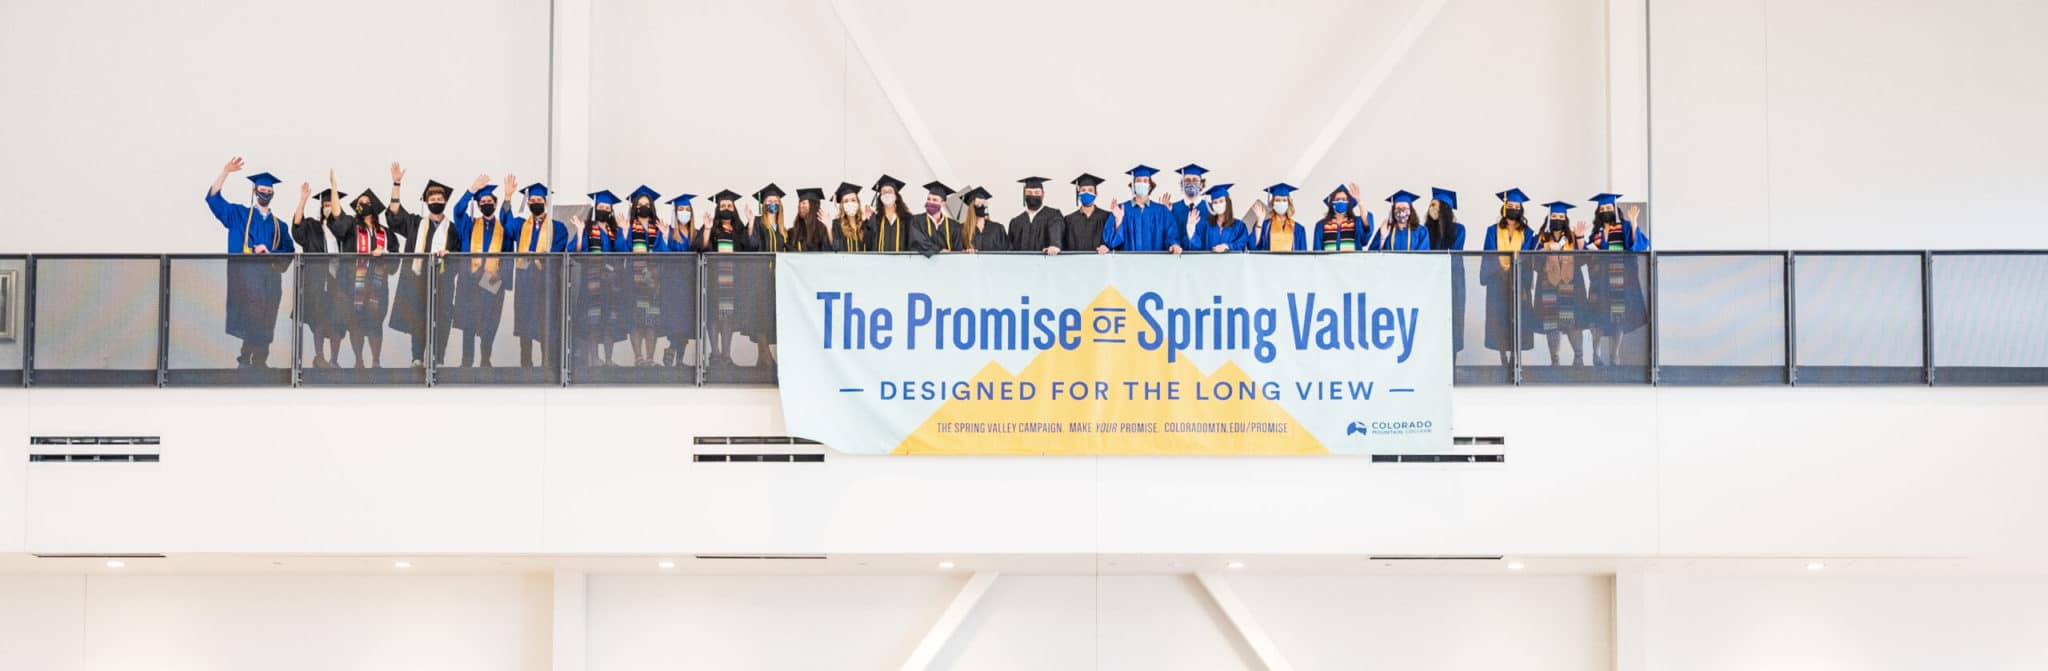 CMC graduates stand by Promise of Spring Valley banner